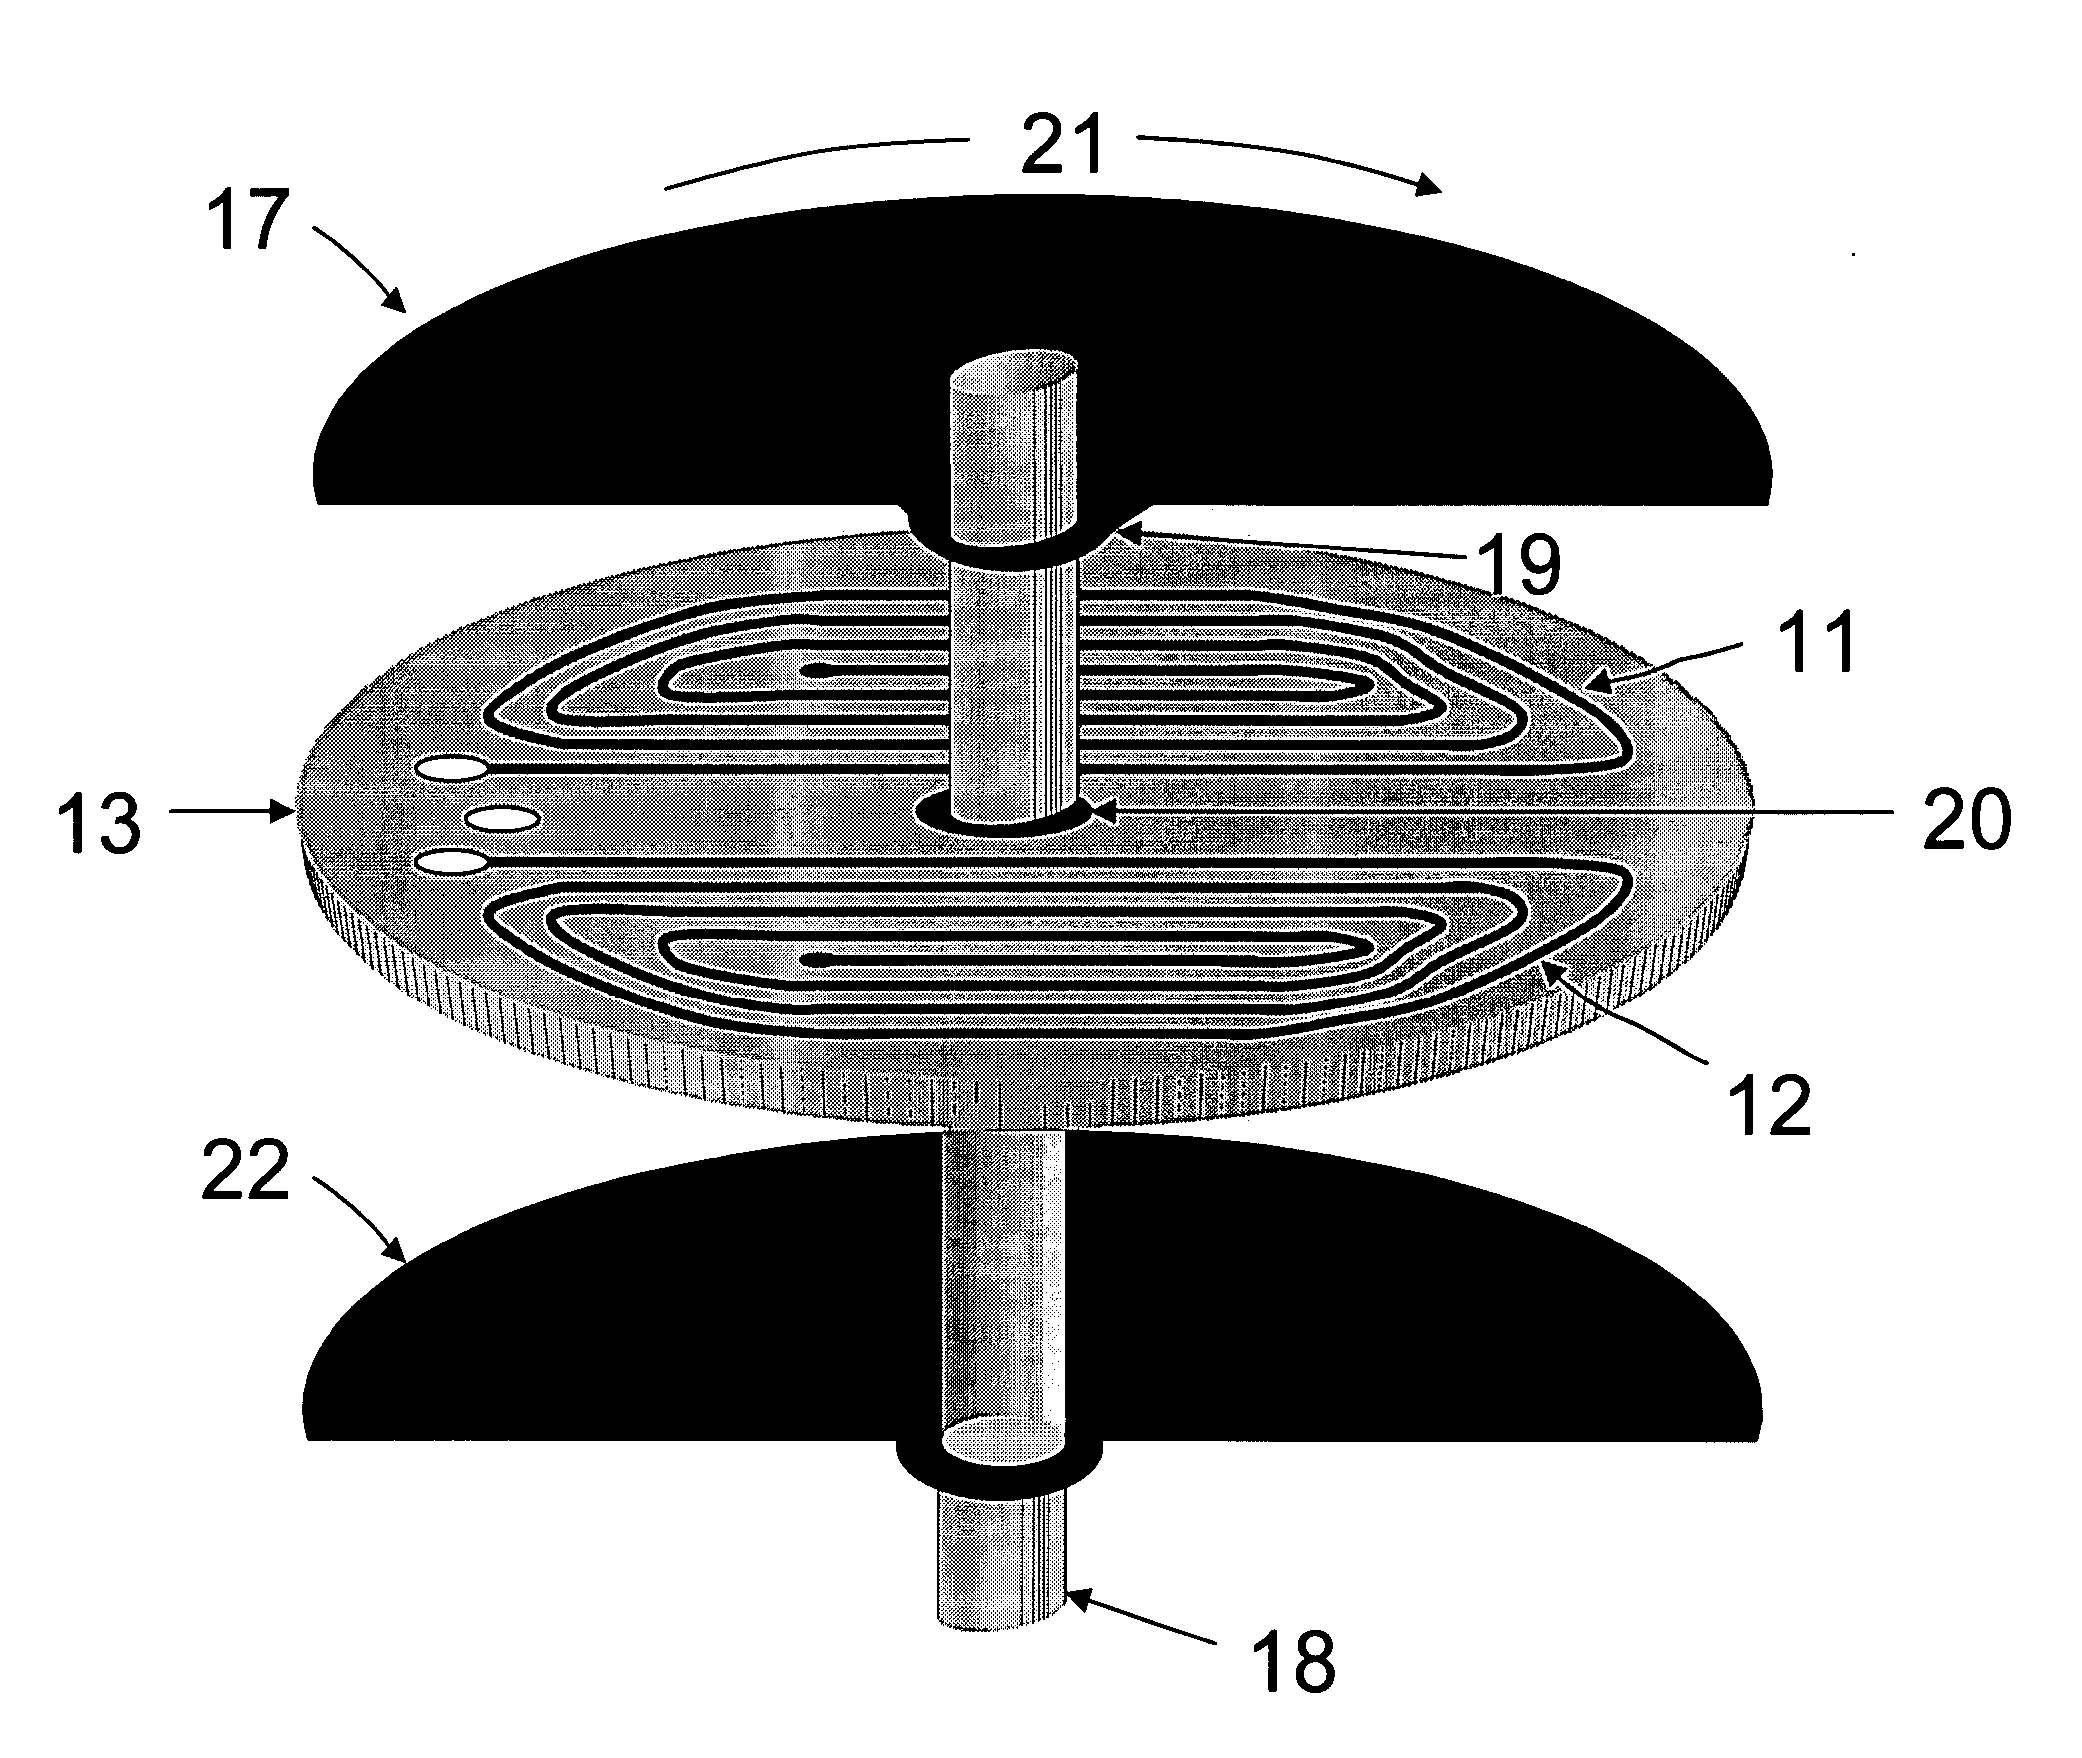 Simplified inductive position sensor and circuit configuration